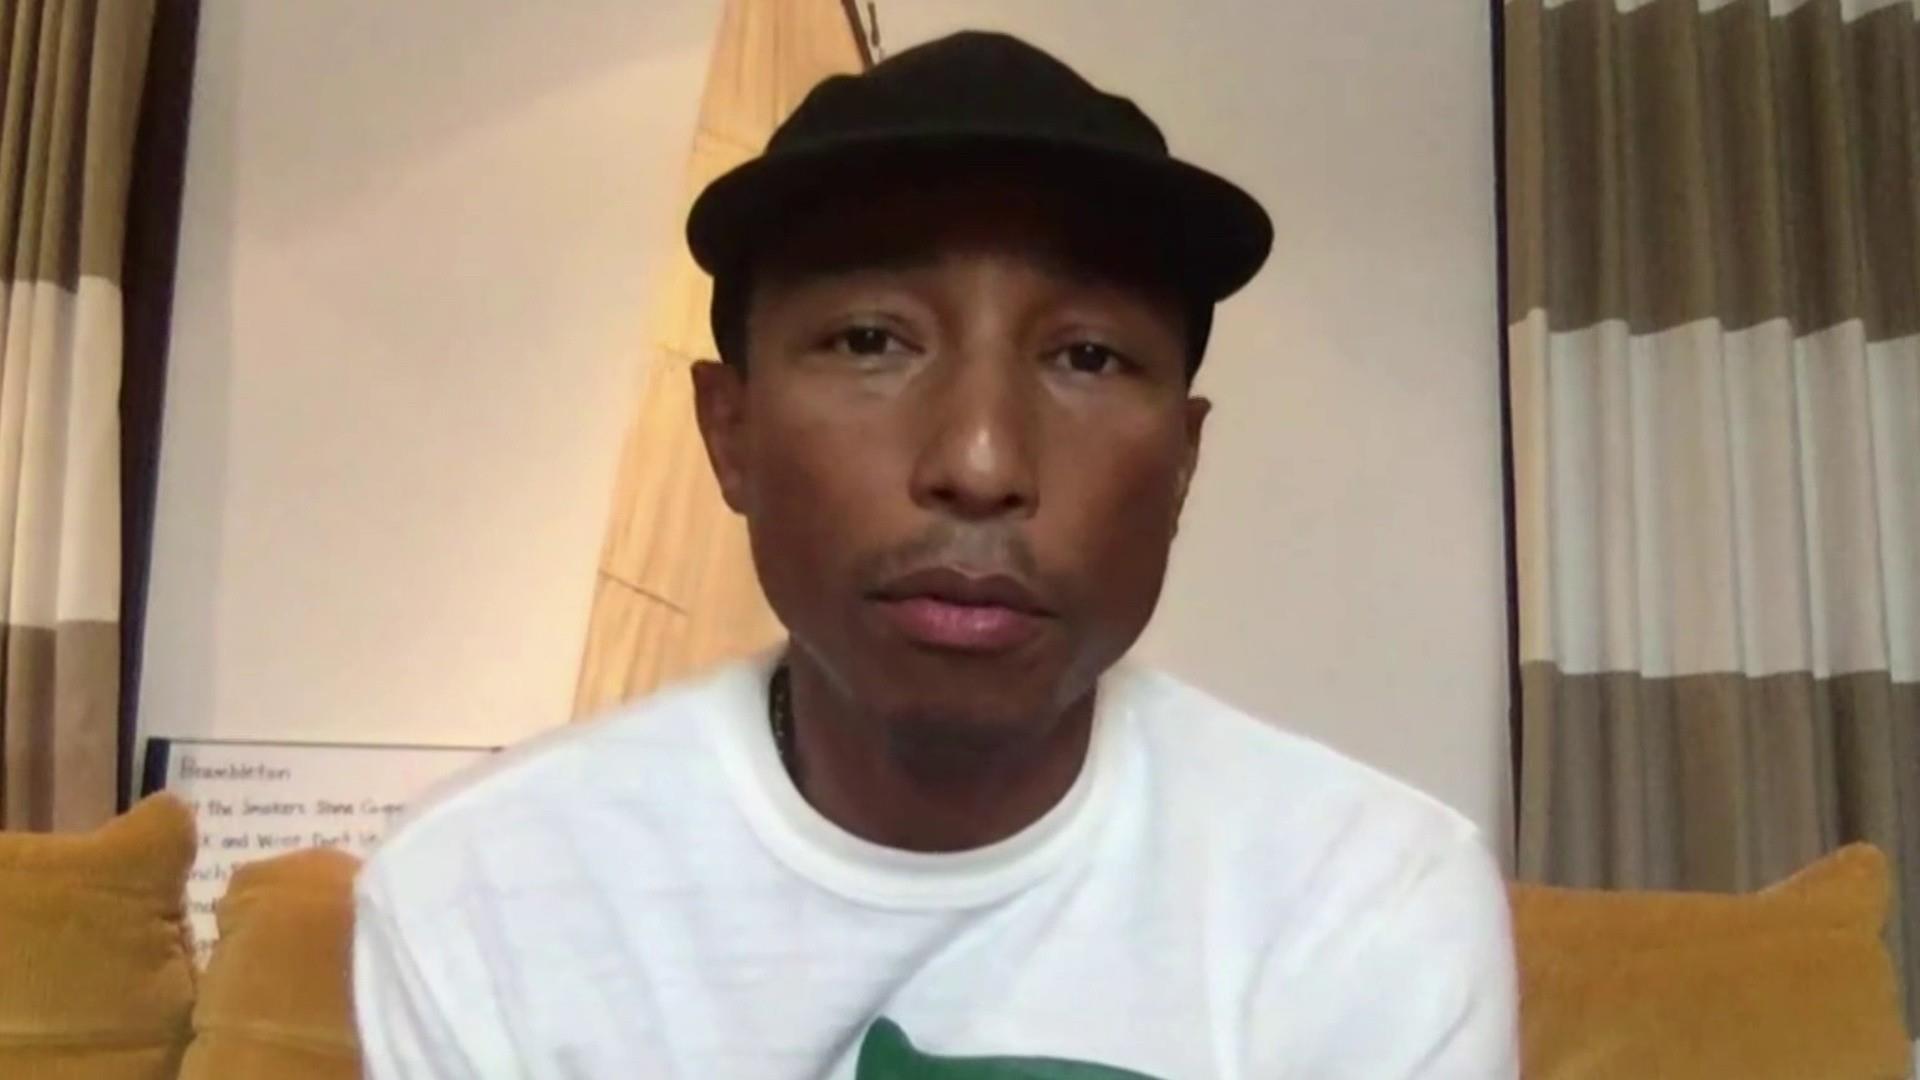 Family Goals! Pharrell Williams Shares Cool Photos Of His Wife And Son  Rocket On Their Trip To Egypt - (Video Clip)